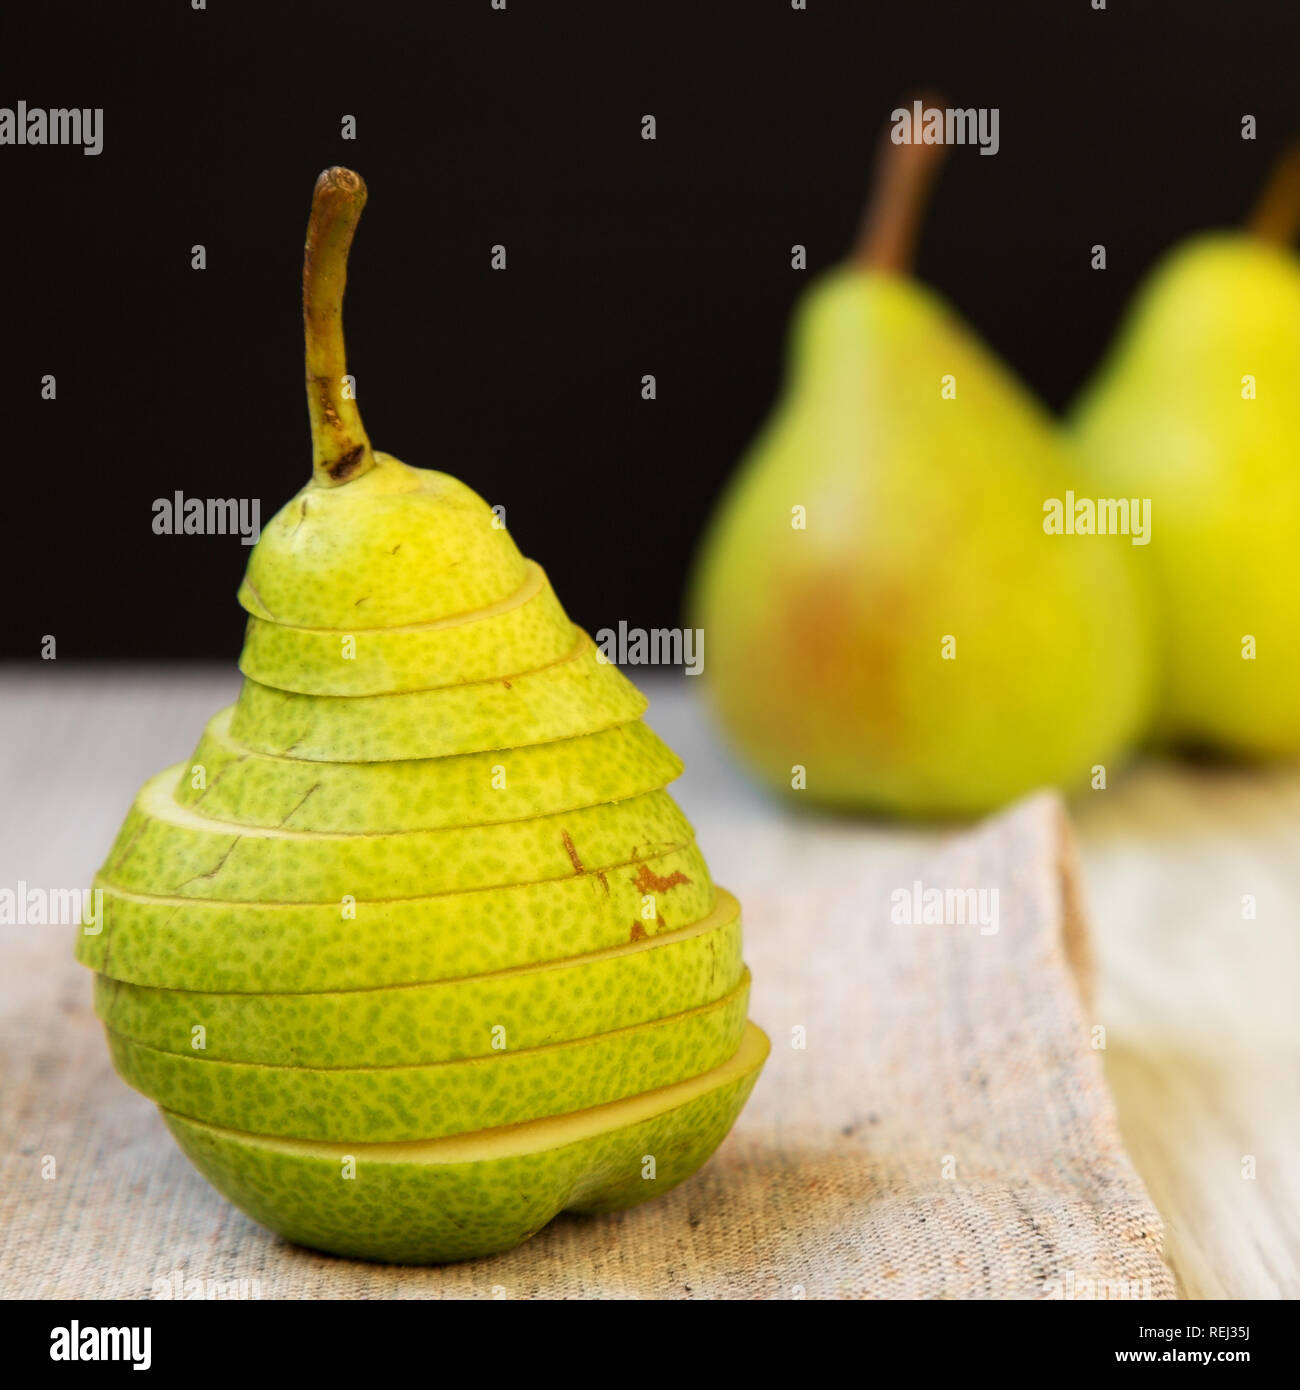 Sliced fresh pear on cloth, side view. Close-up. Stock Photo